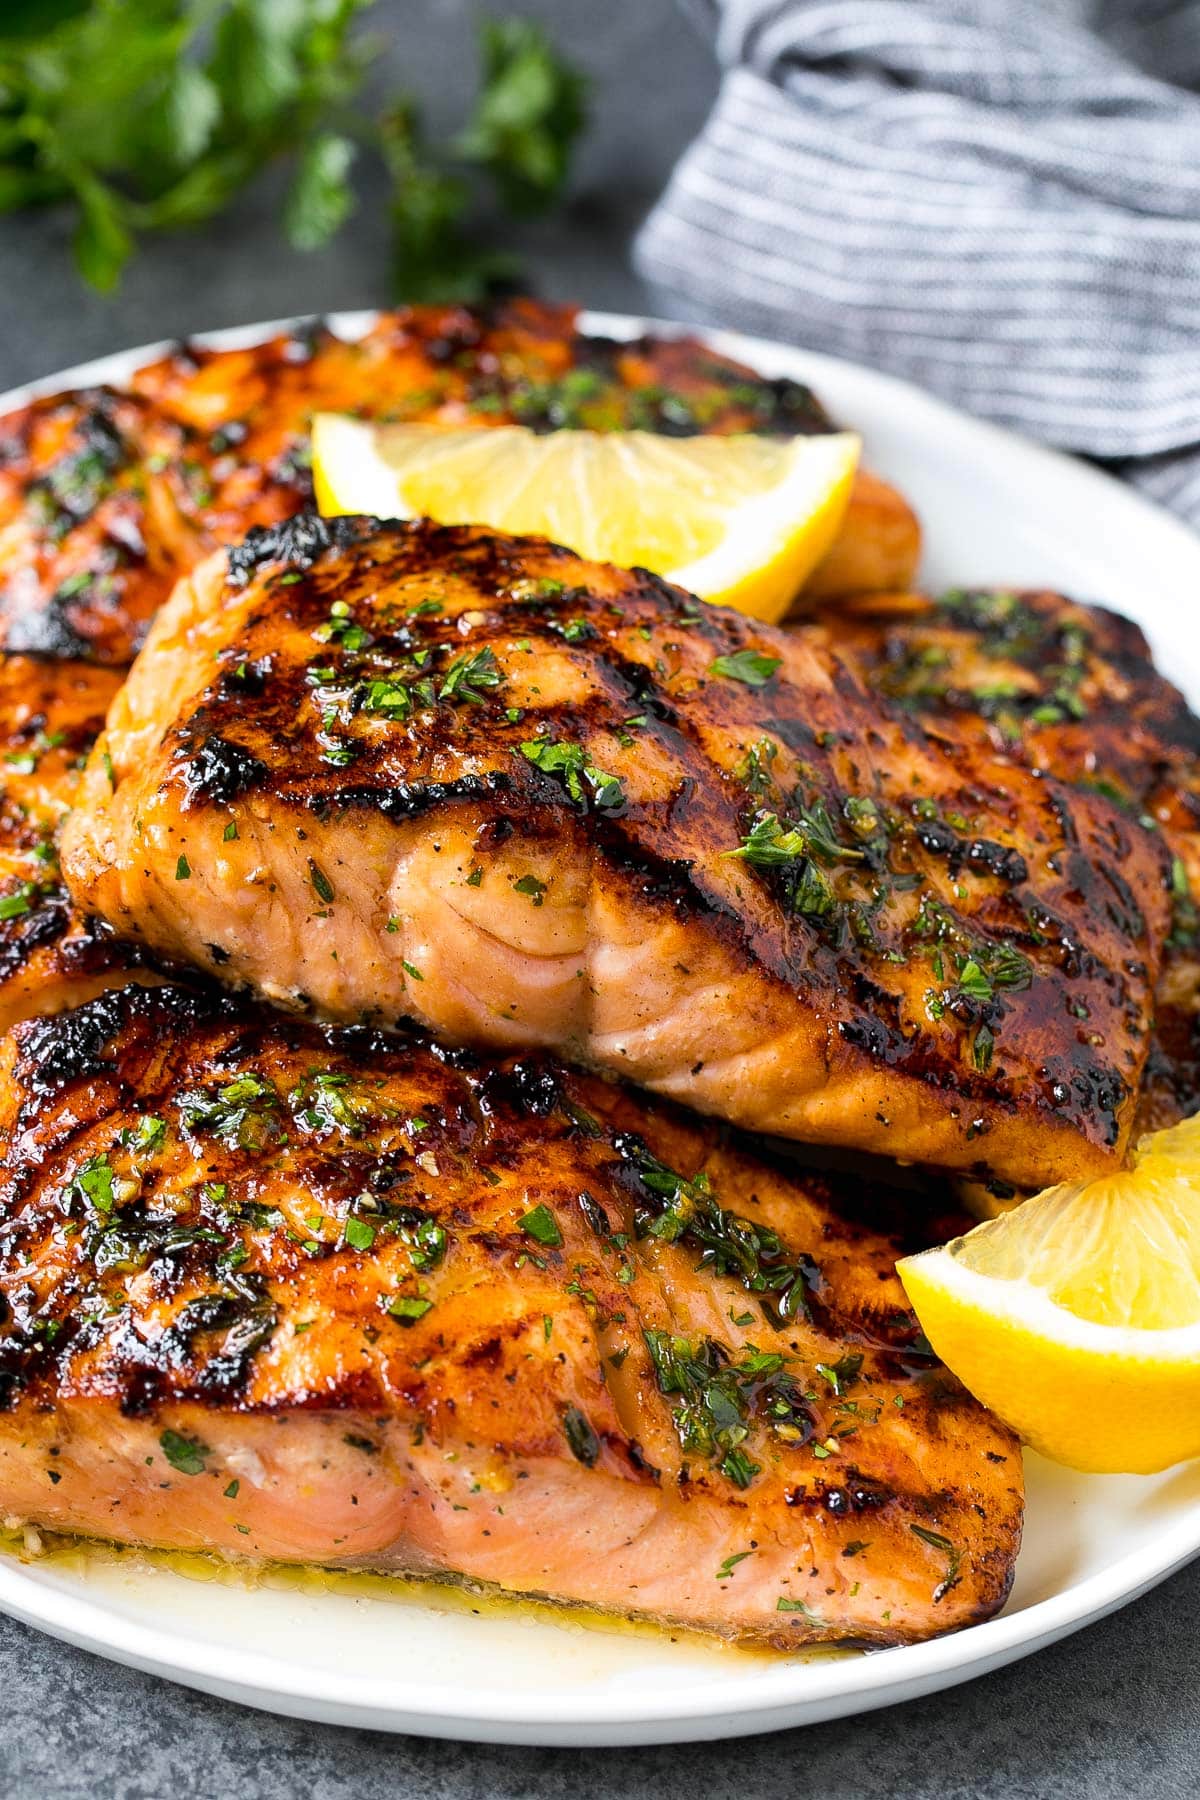 Grilled salmon on a plate with lemon wedges on the side.